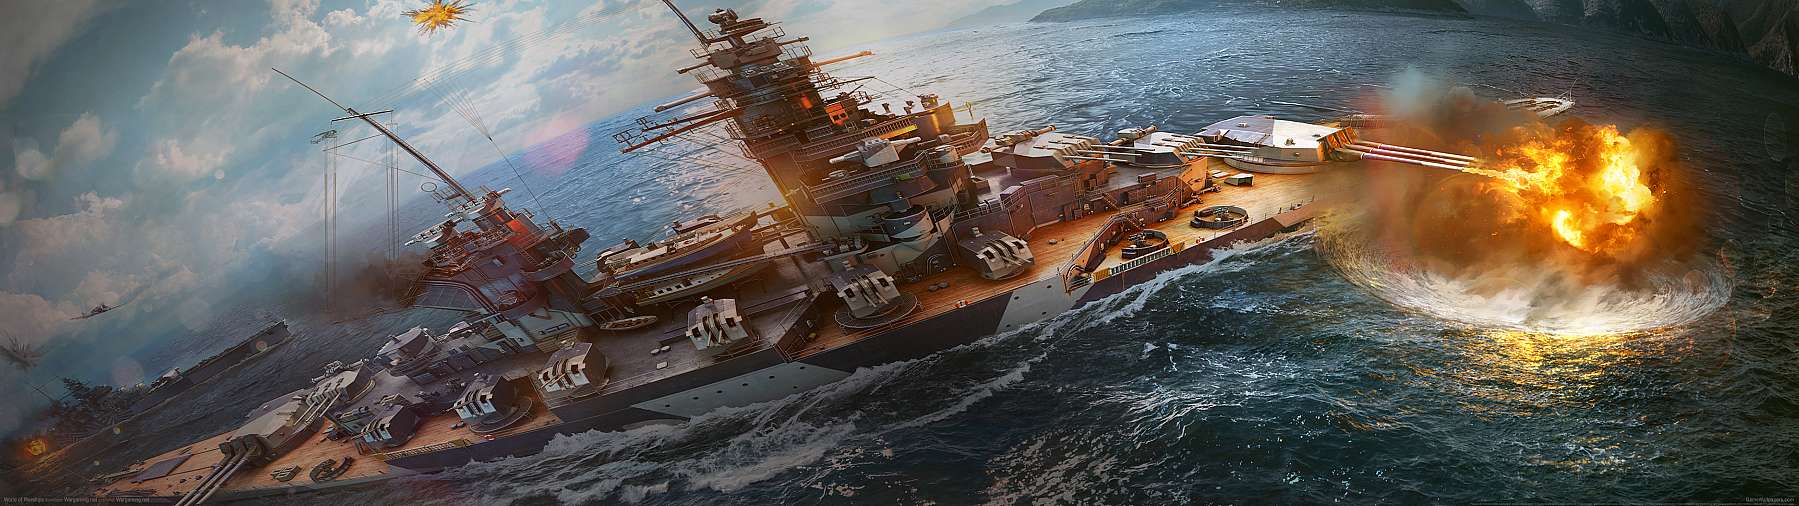 World of Warships superwide wallpaper or background 27